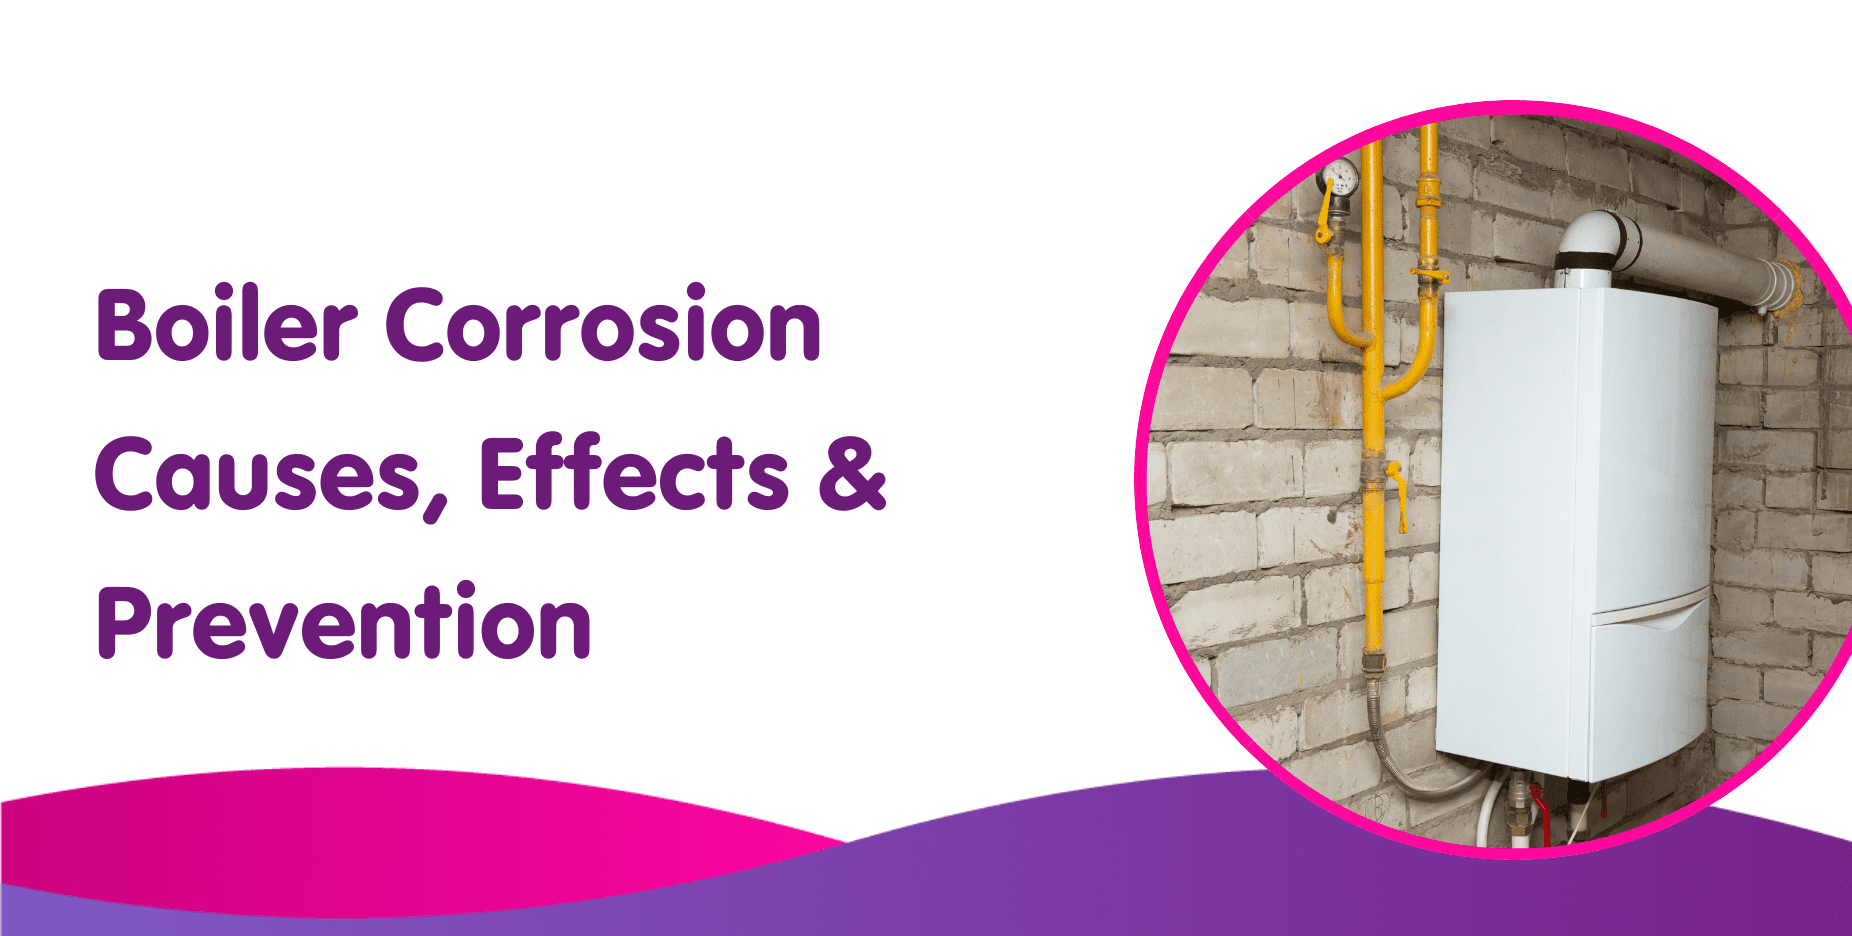 Boiler Corrosion Causes, Effects & Prevention